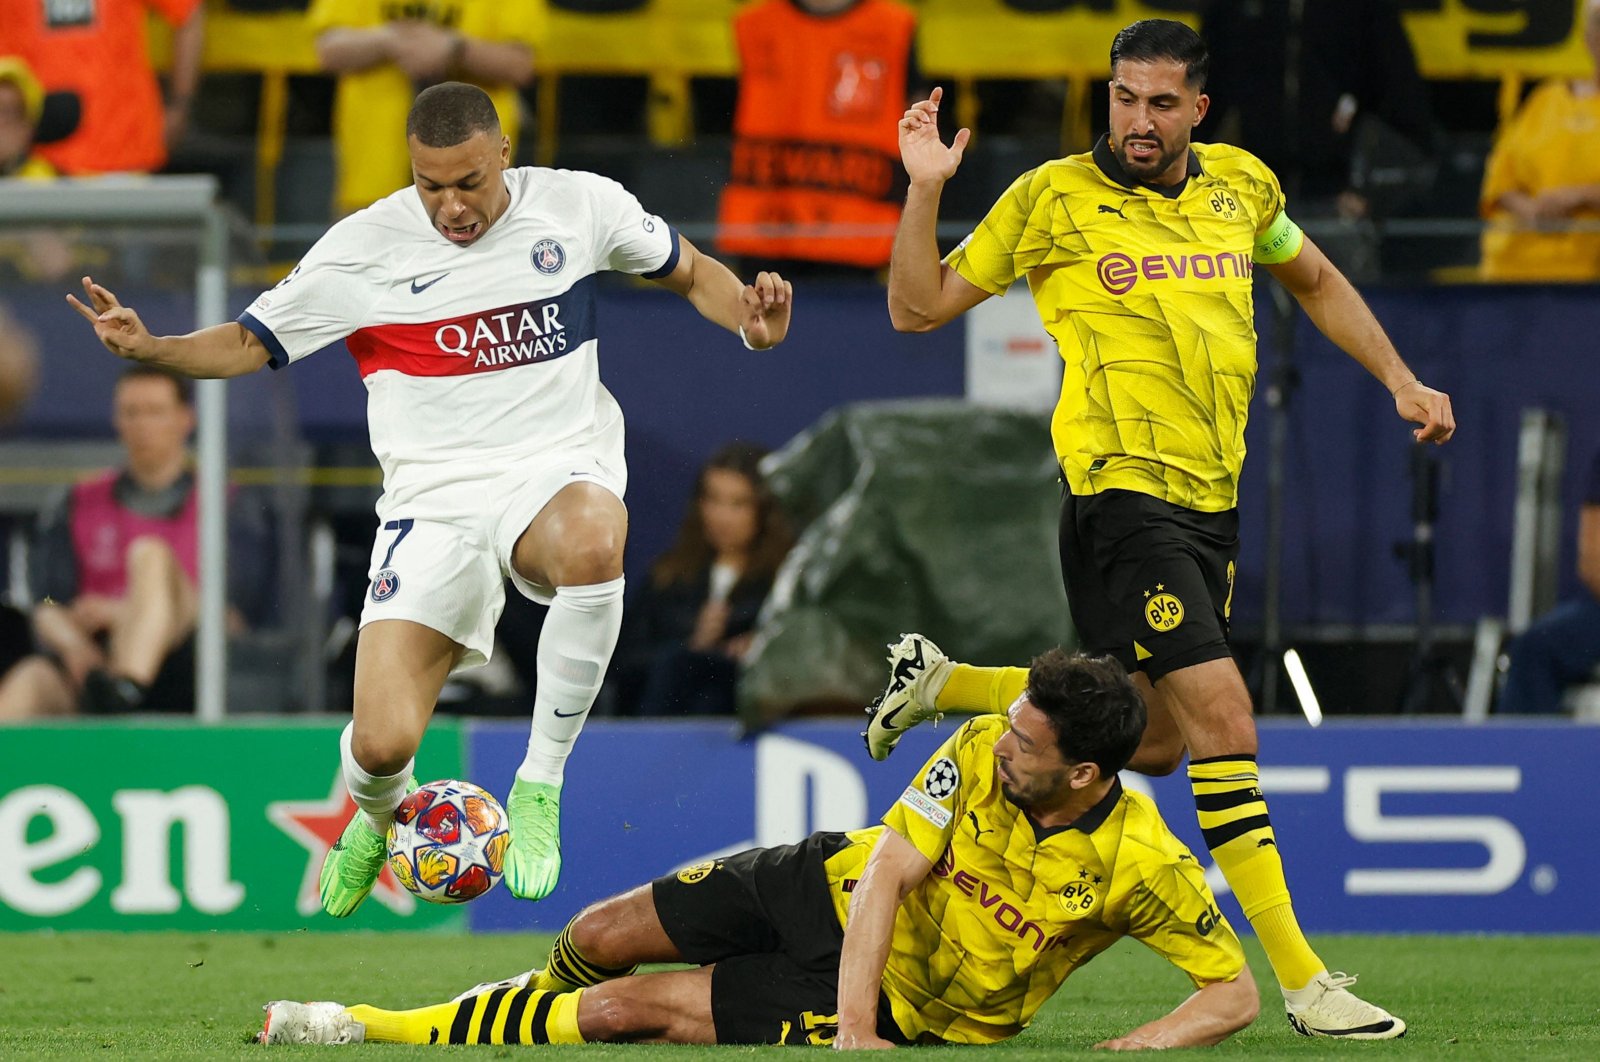 PSG eye turning tables on Dortmund in Champions League semifinals